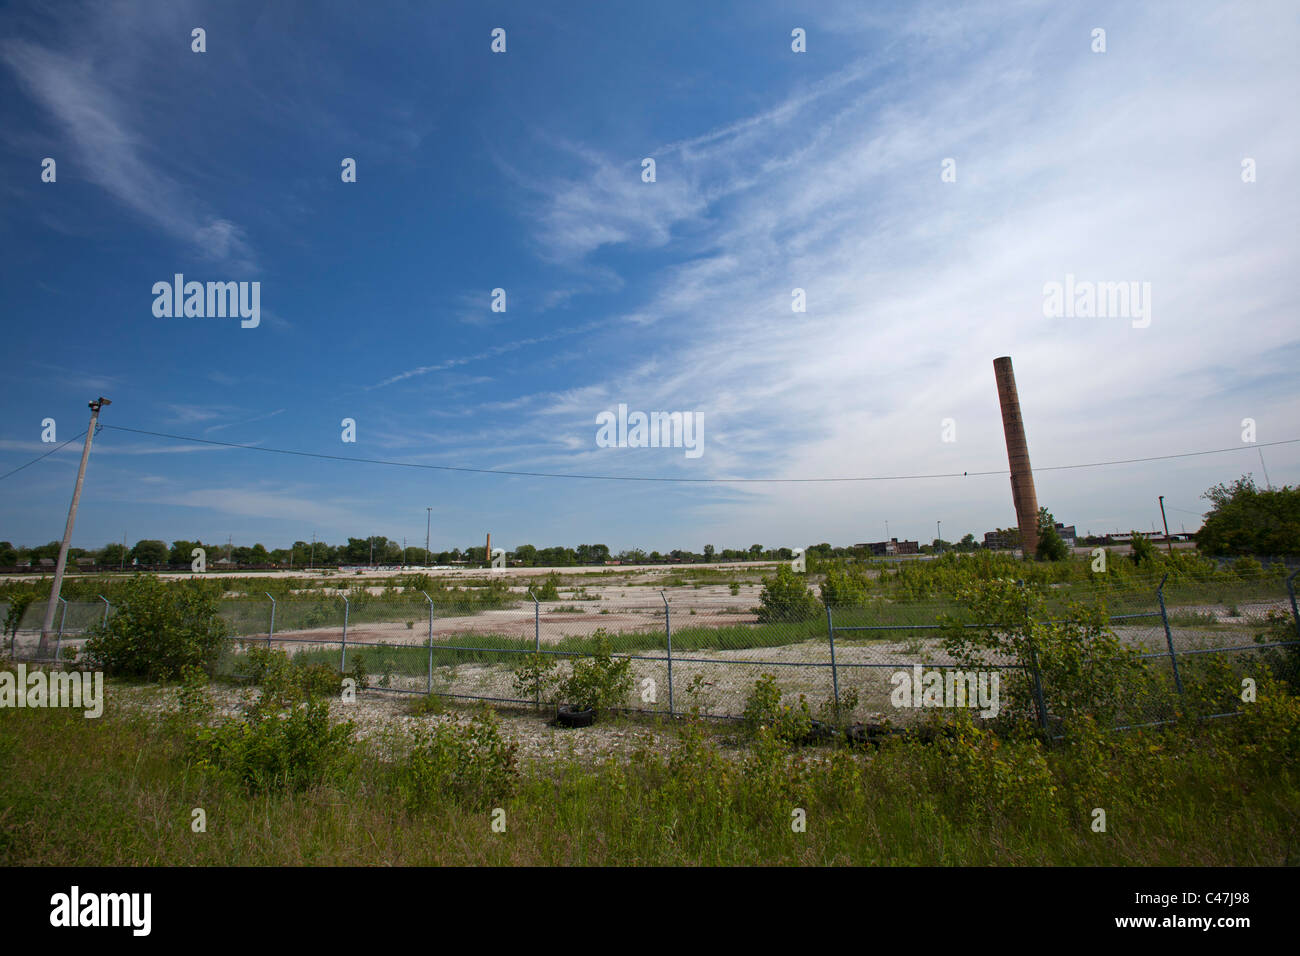 Toledo, Ohio - The vacant site of a former Jeep assembly plant. Stock Photo